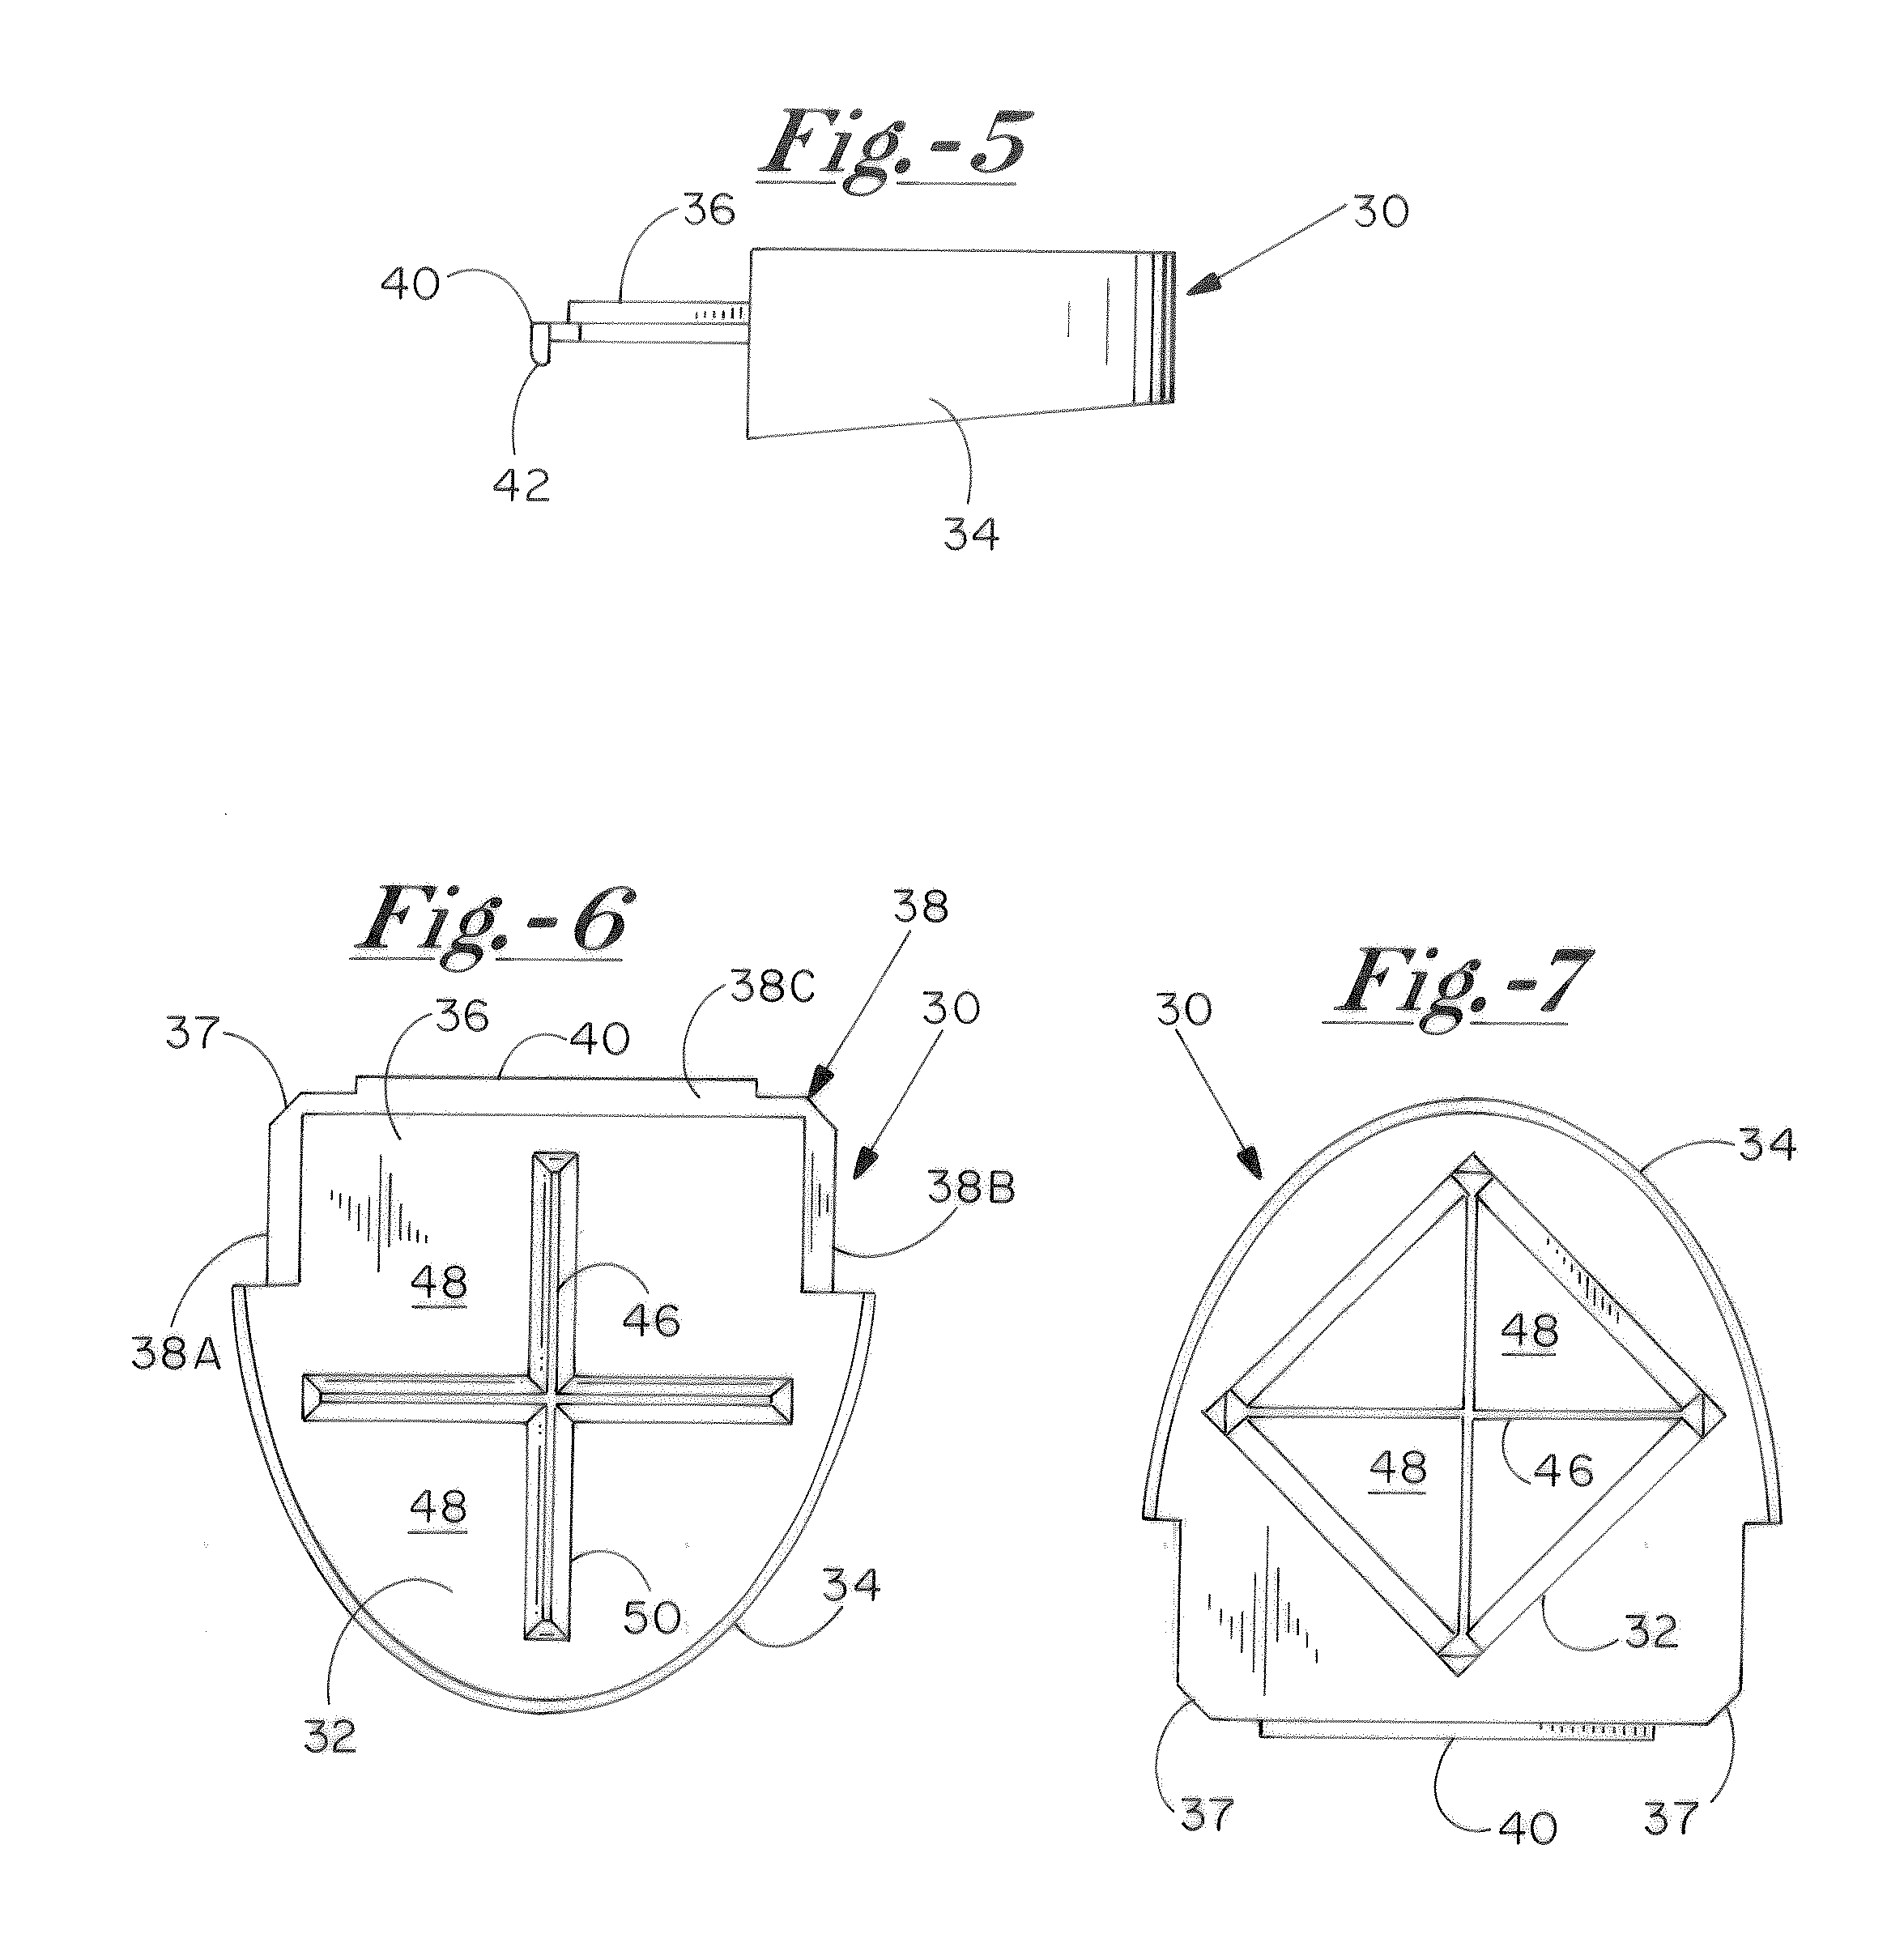 Apparatus for securing a bag with scented retaining element